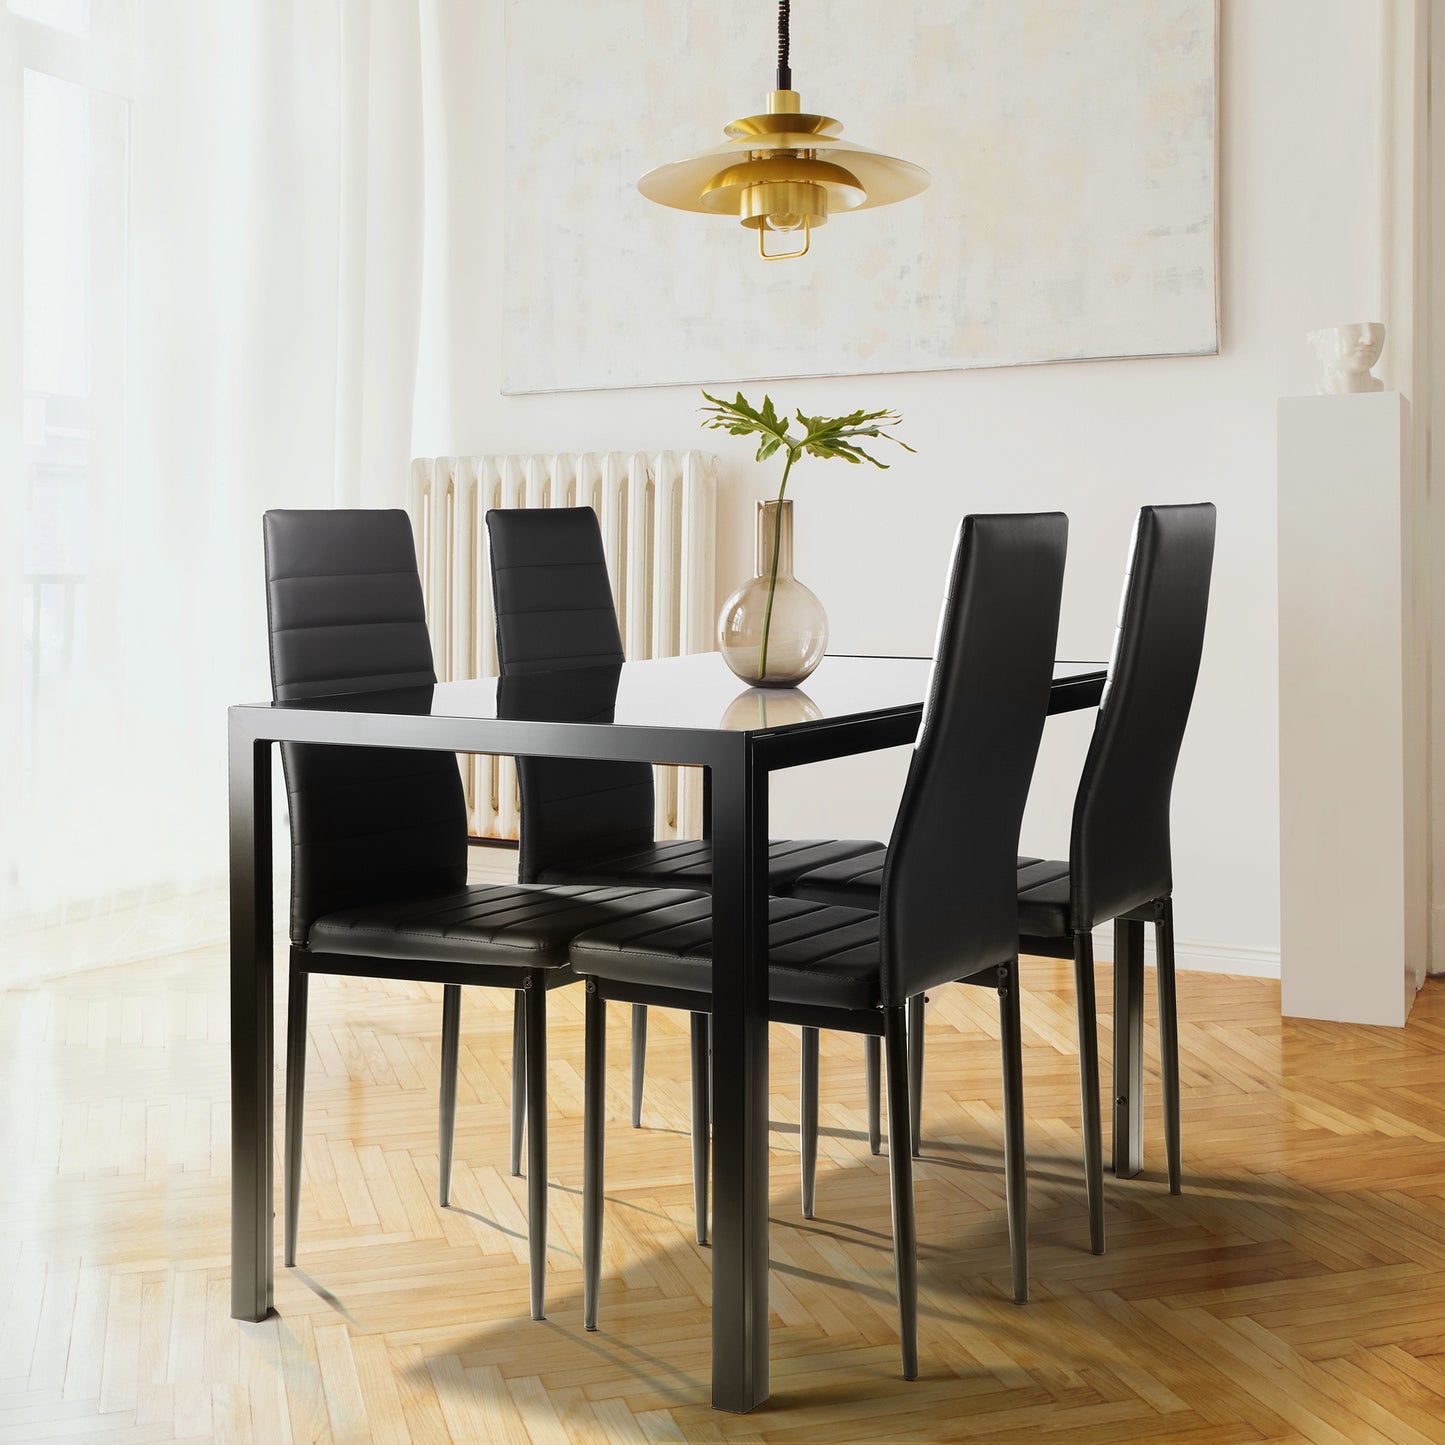 5 Pieces Dining Table Set for 4, Kitchen Room Tempered Glass Dining Table, 4 Faux Leather Chairs, Black